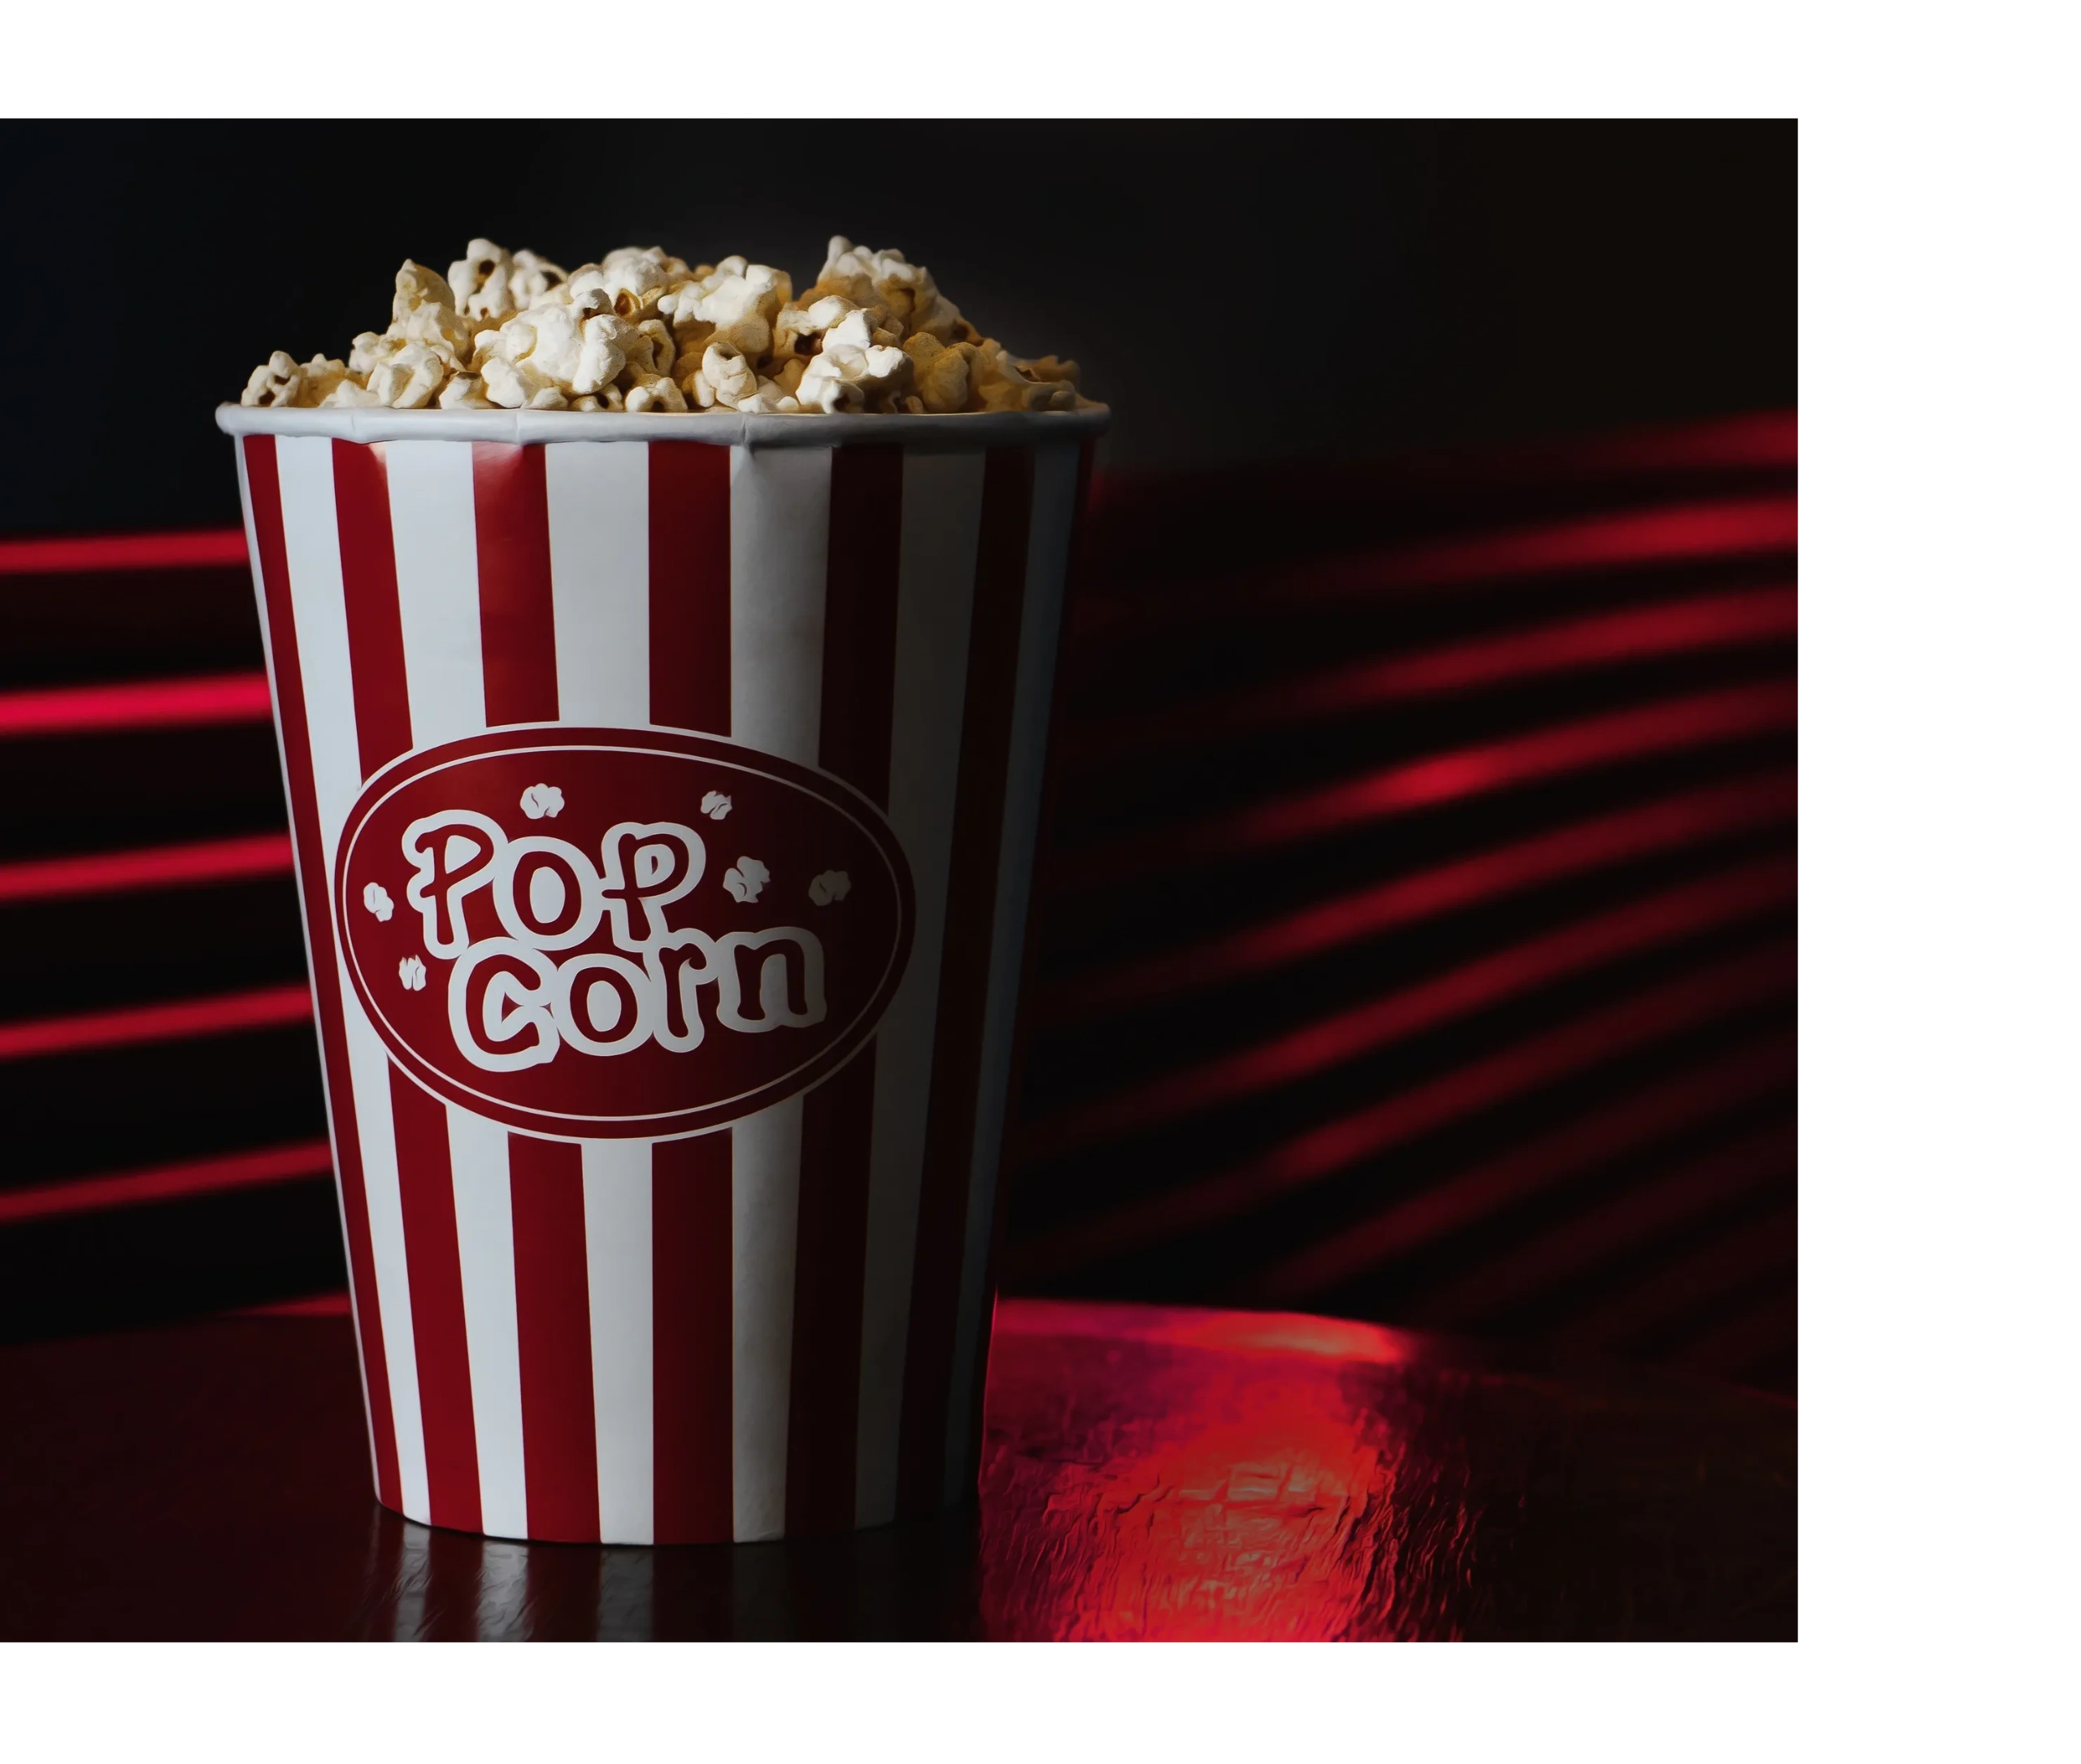 theater popcorn against a red and black background